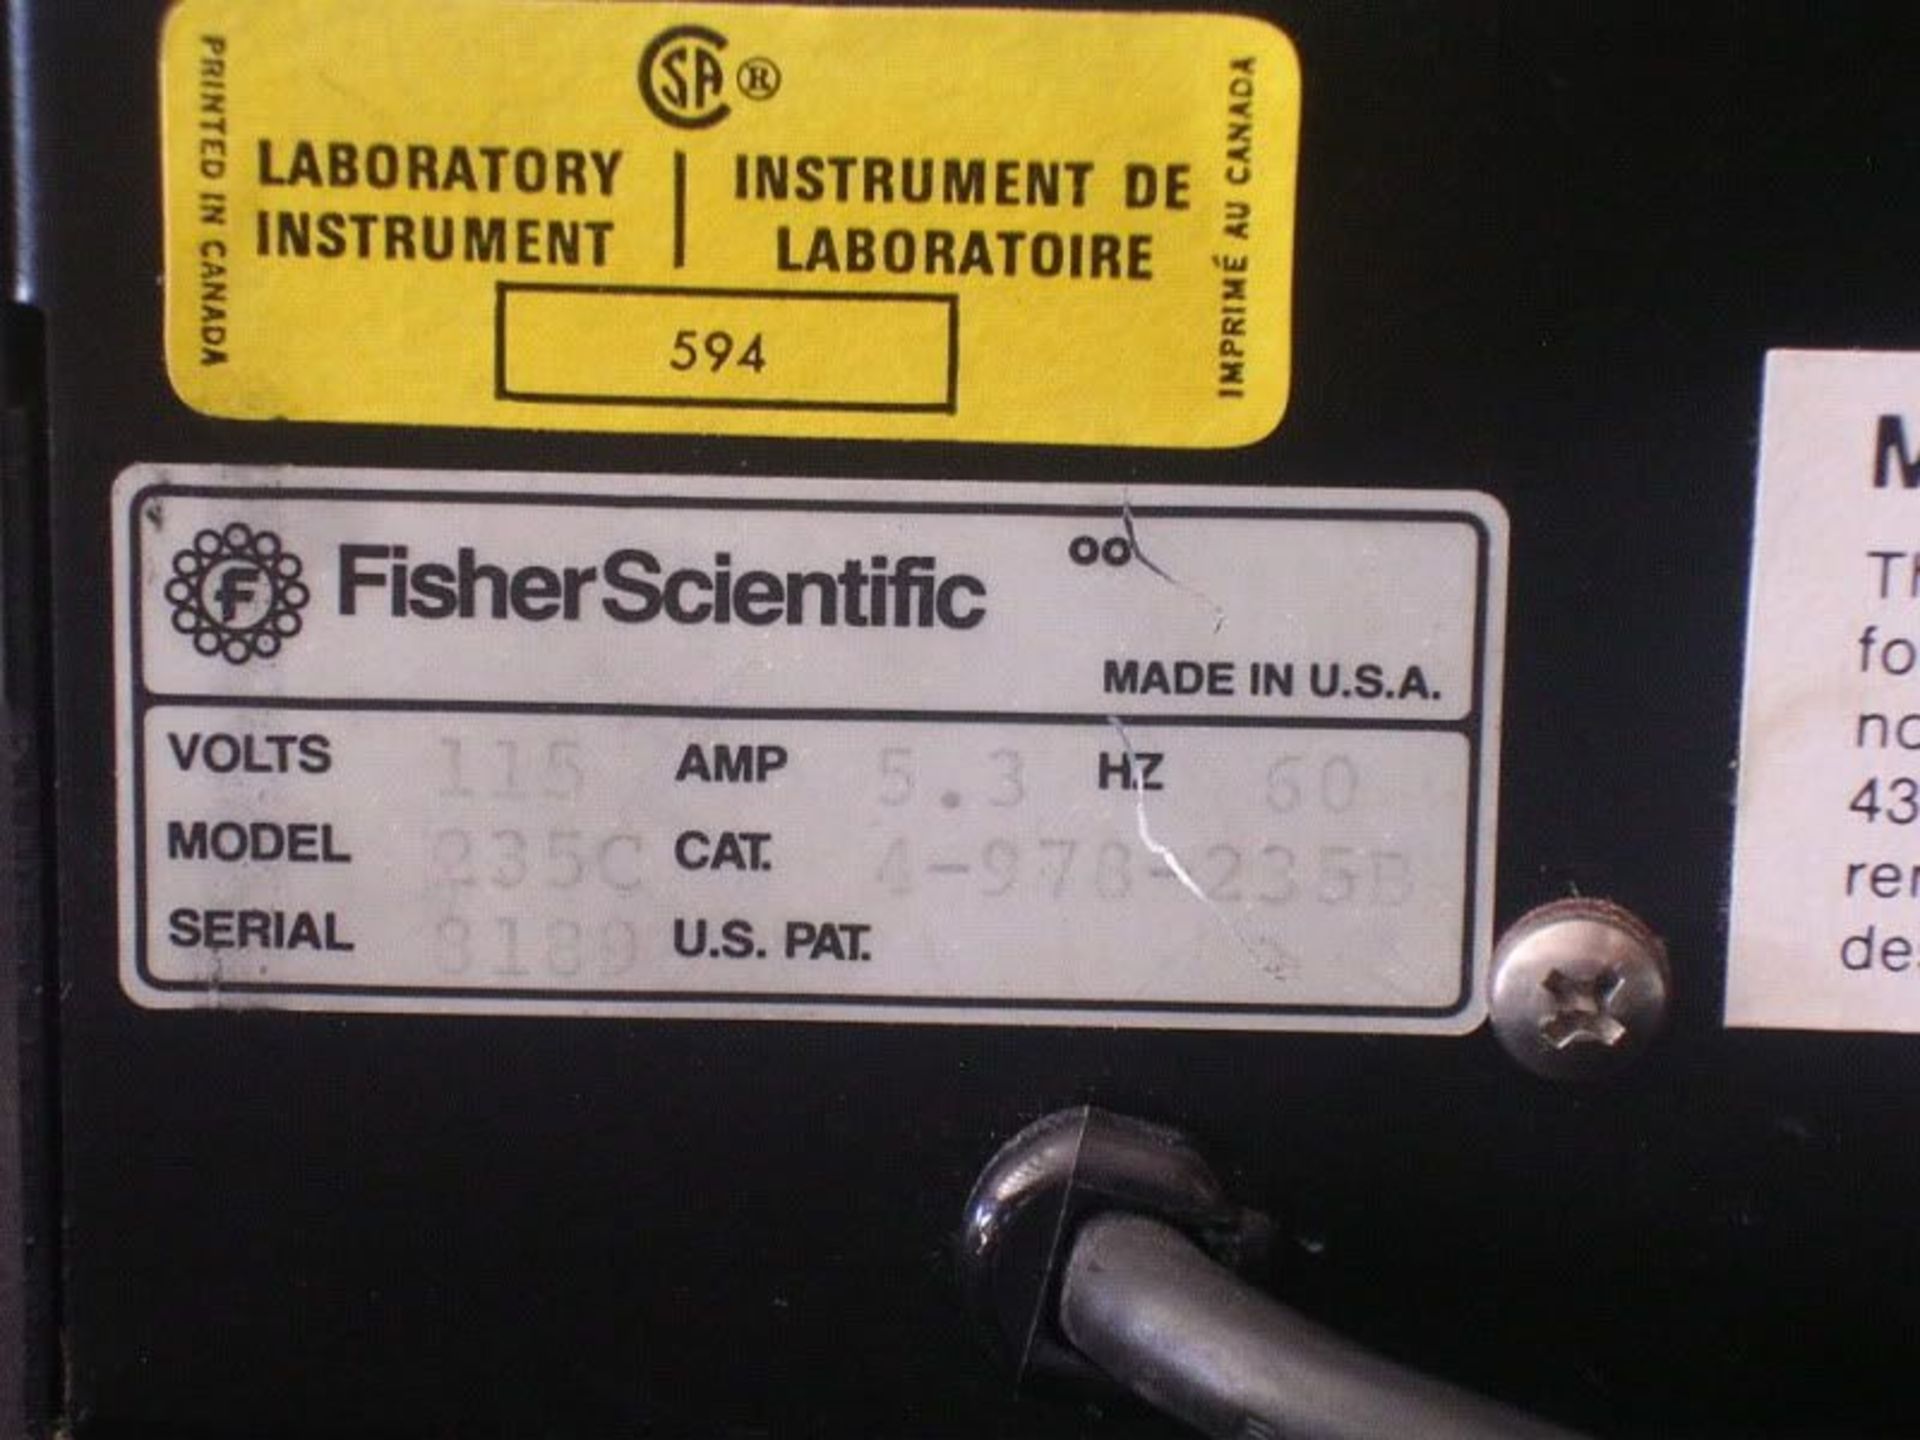 Fisher Scientific Micro-Centrifuge Model 235C with 20 Place Rotor, Qty 1, 320770438767 - Image 5 of 7